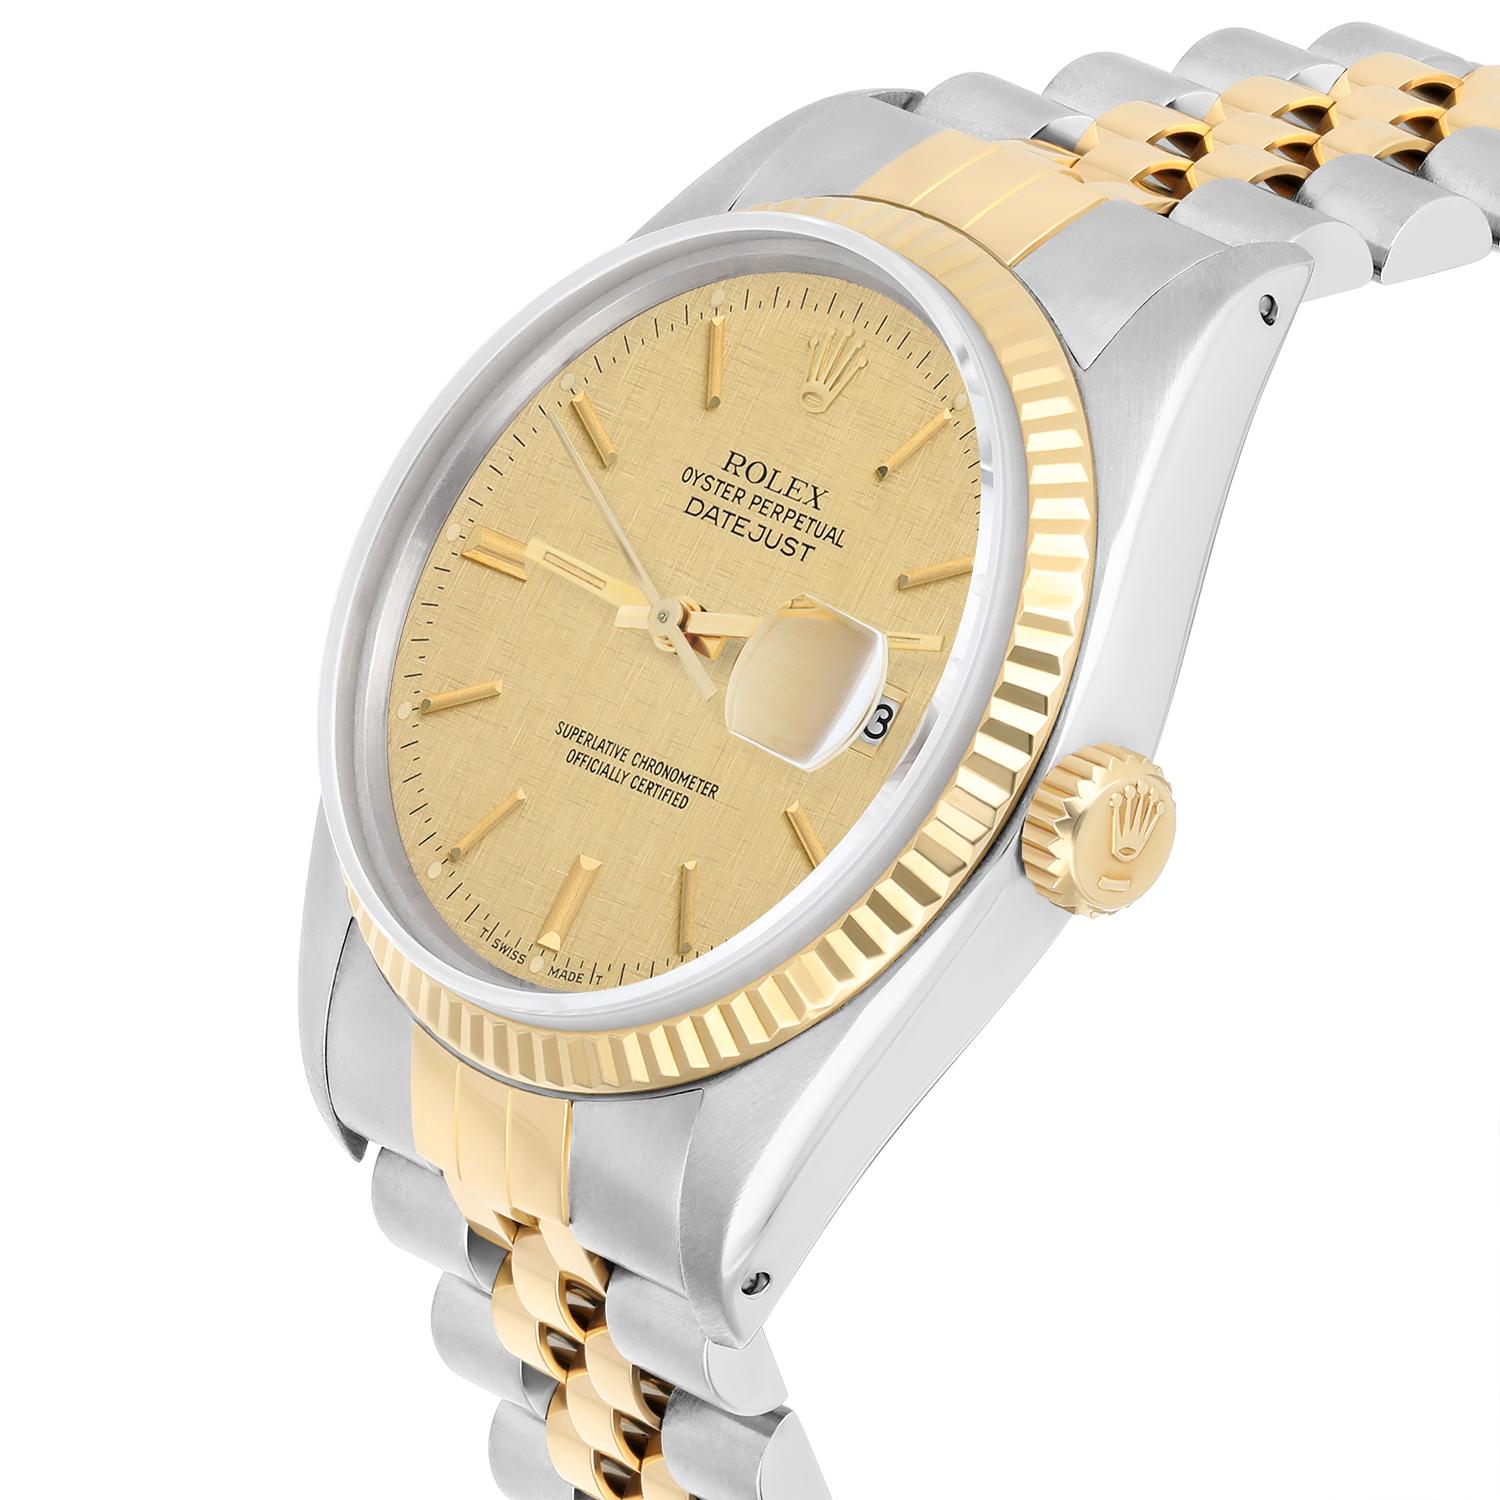 Rolex Datejust 36mm Two Tone Champagne Linen Dial Jubilee 16013 Circa 1979 For Sale 2